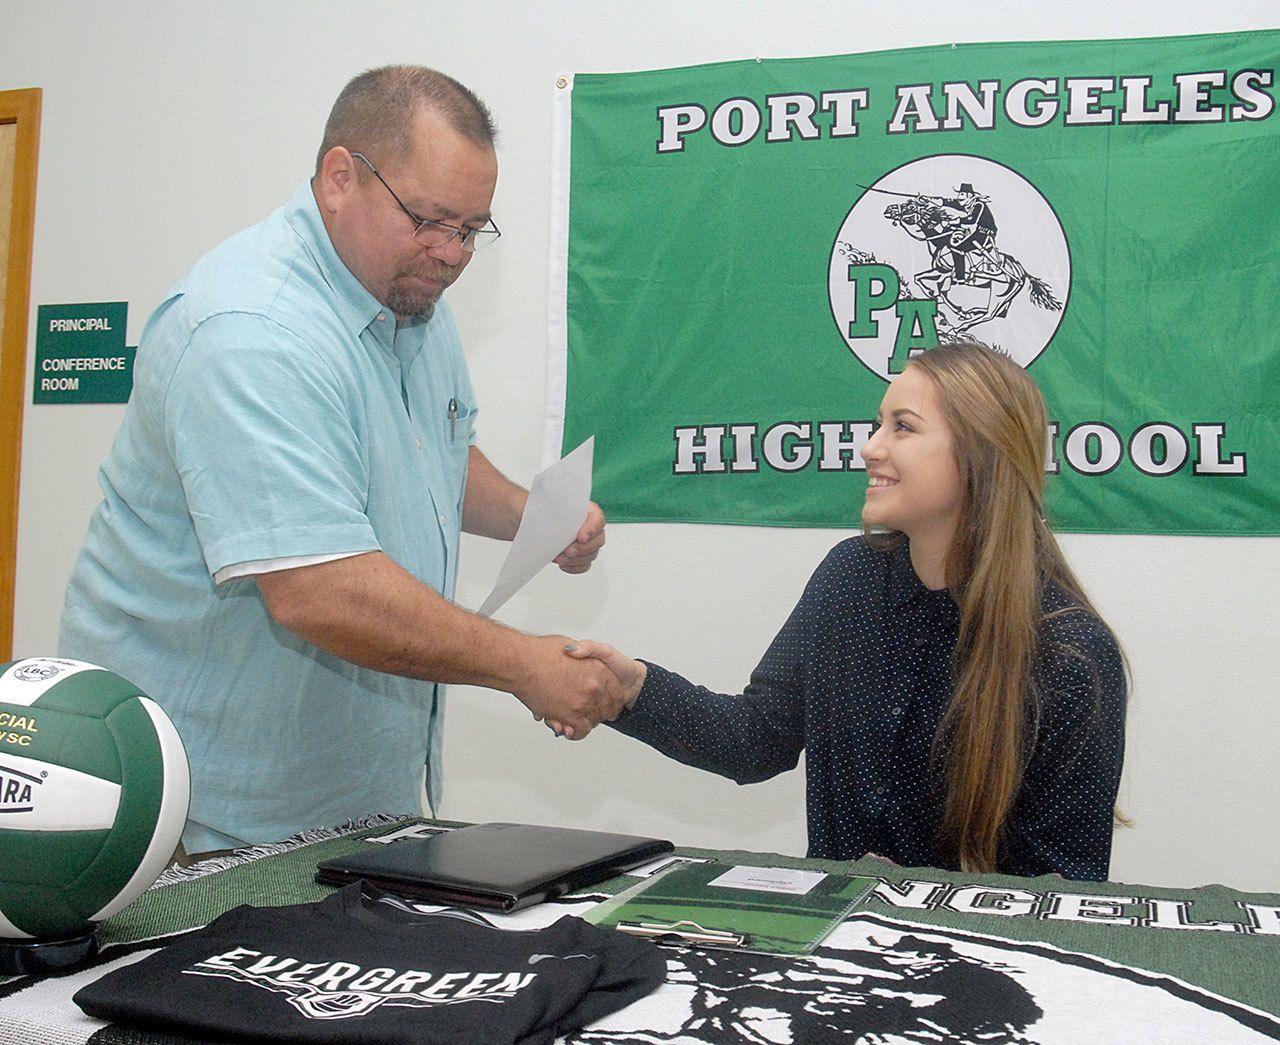 Keith Thorpe/Peninsula Daily News                                Port Angeles High School senior Kiana Robideau, seated, receives congratulations from athletic director Dwayne Johnson prior to Robideau signing a letter of intent on Wednesday to attend Evergreen State College on a volleyball scholarship.